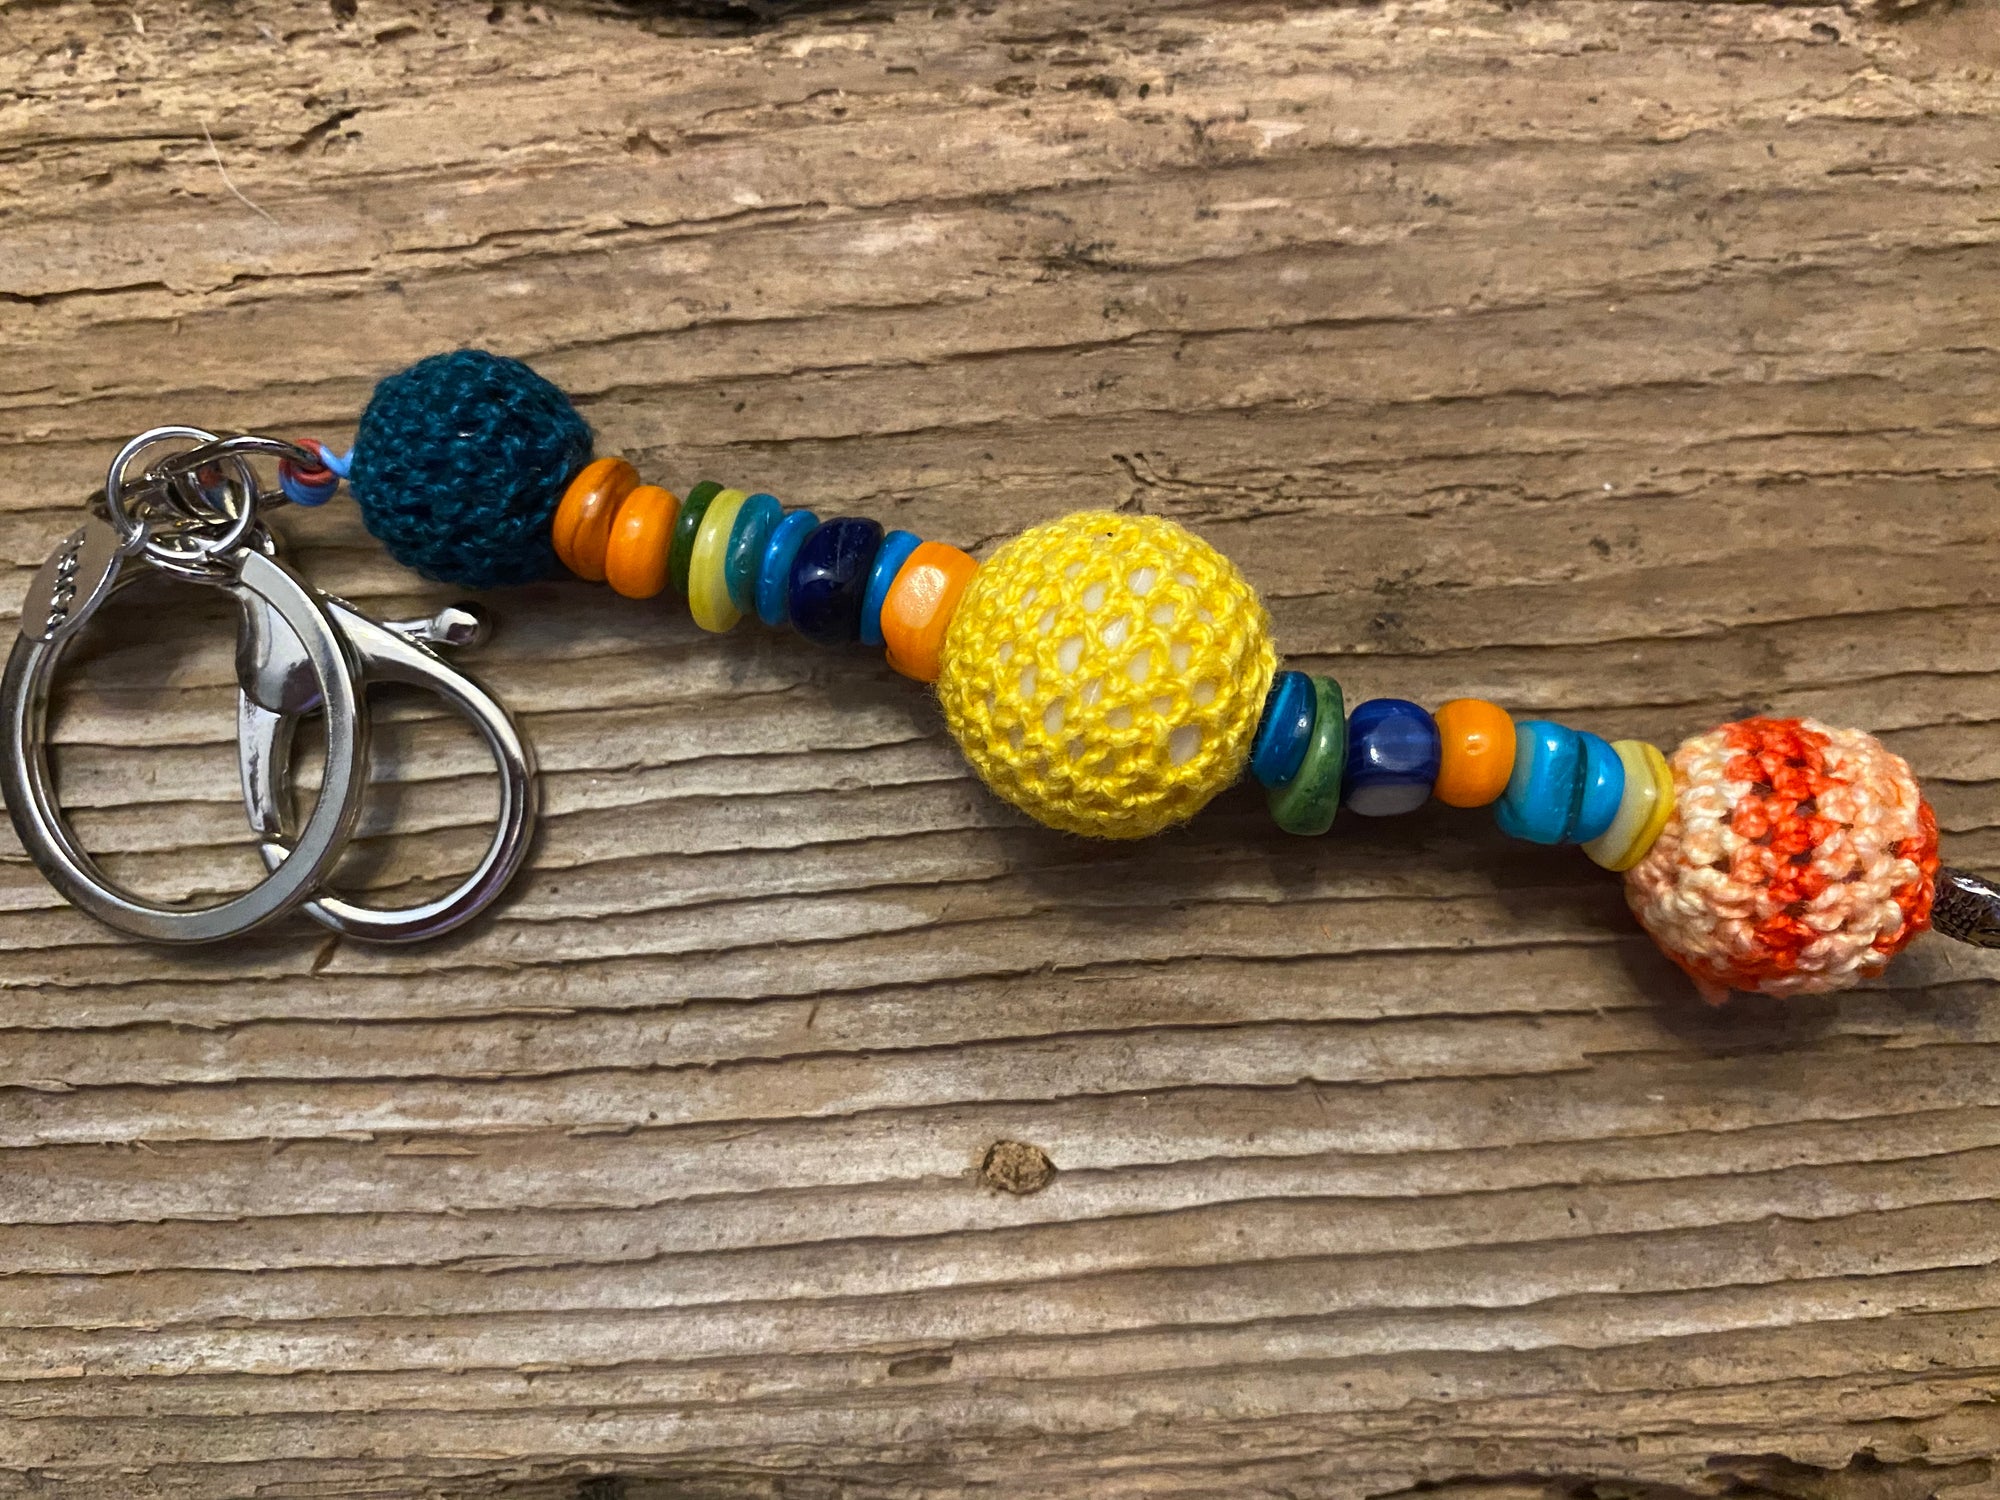 Shanga Keychain forest, lemon and orange macramé beads with colorful stone accents